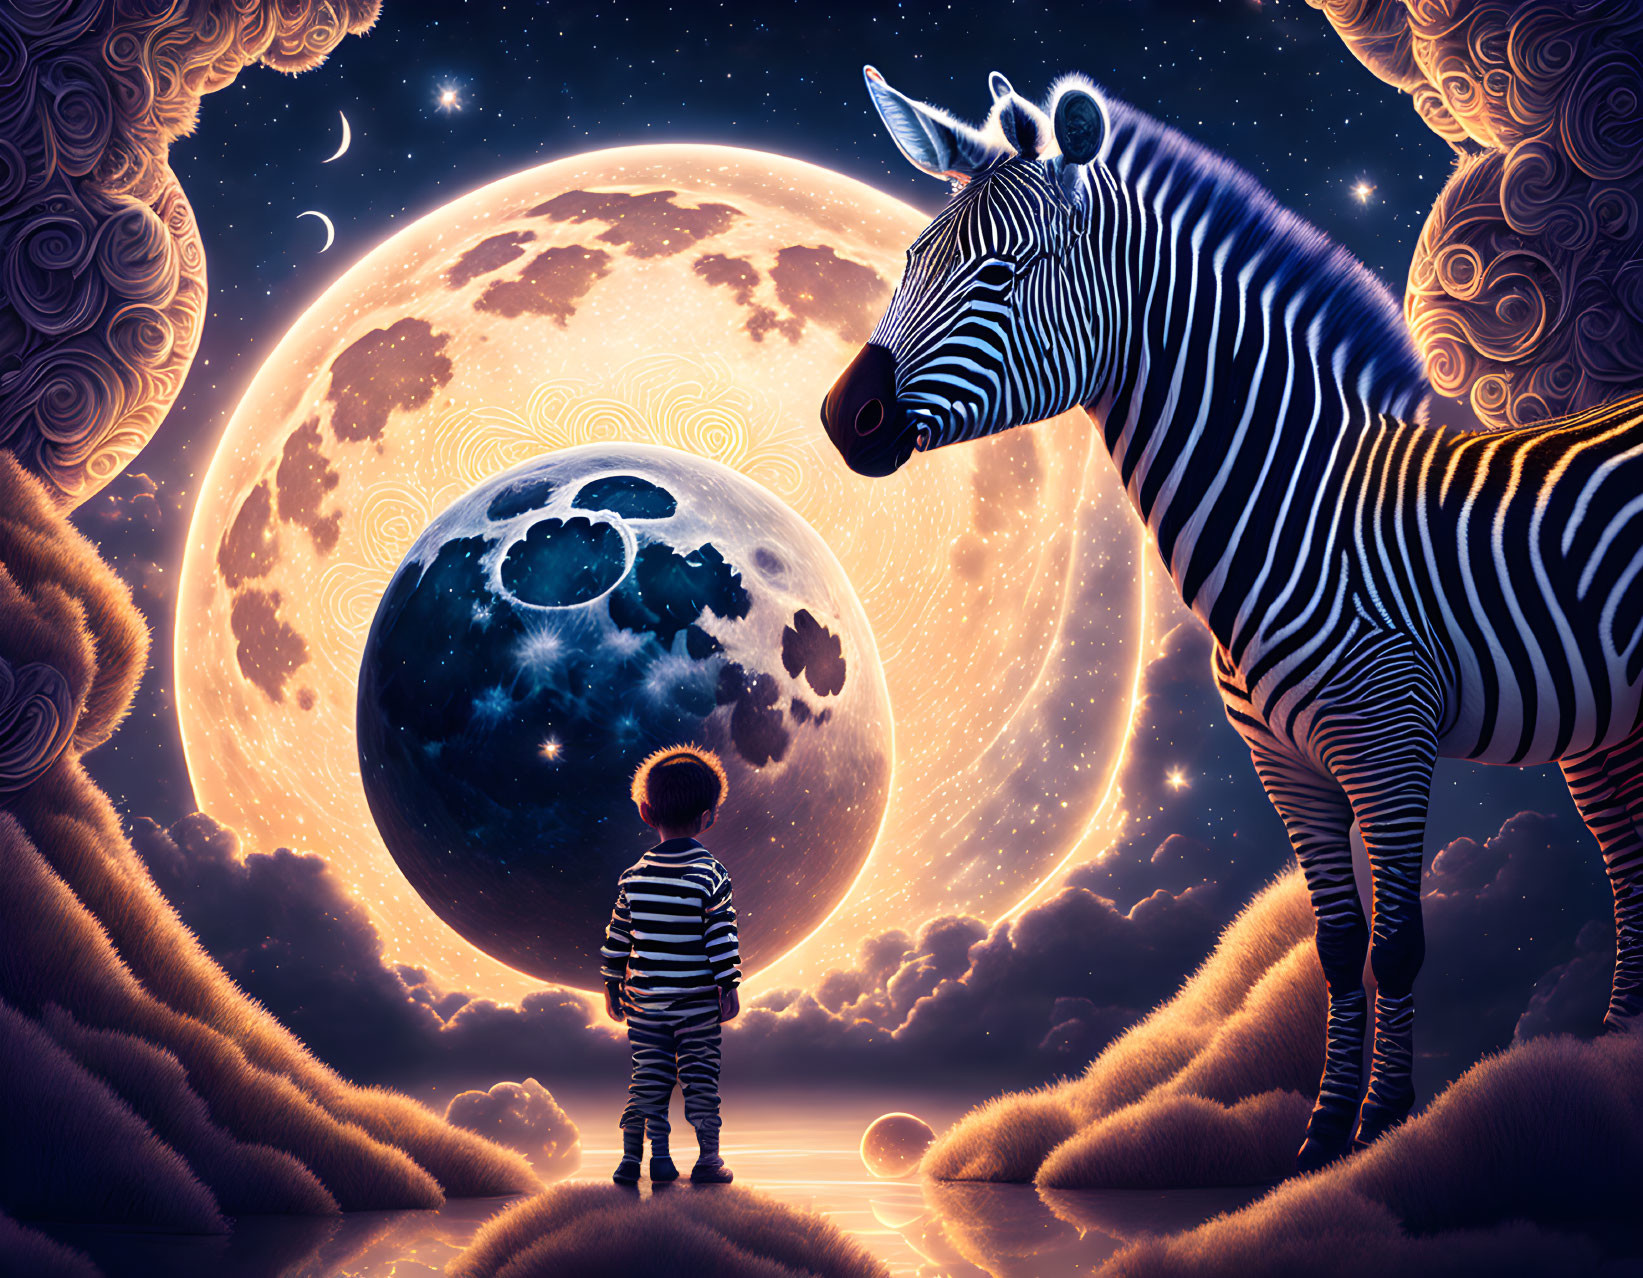 The moon, the zebra and the Child 